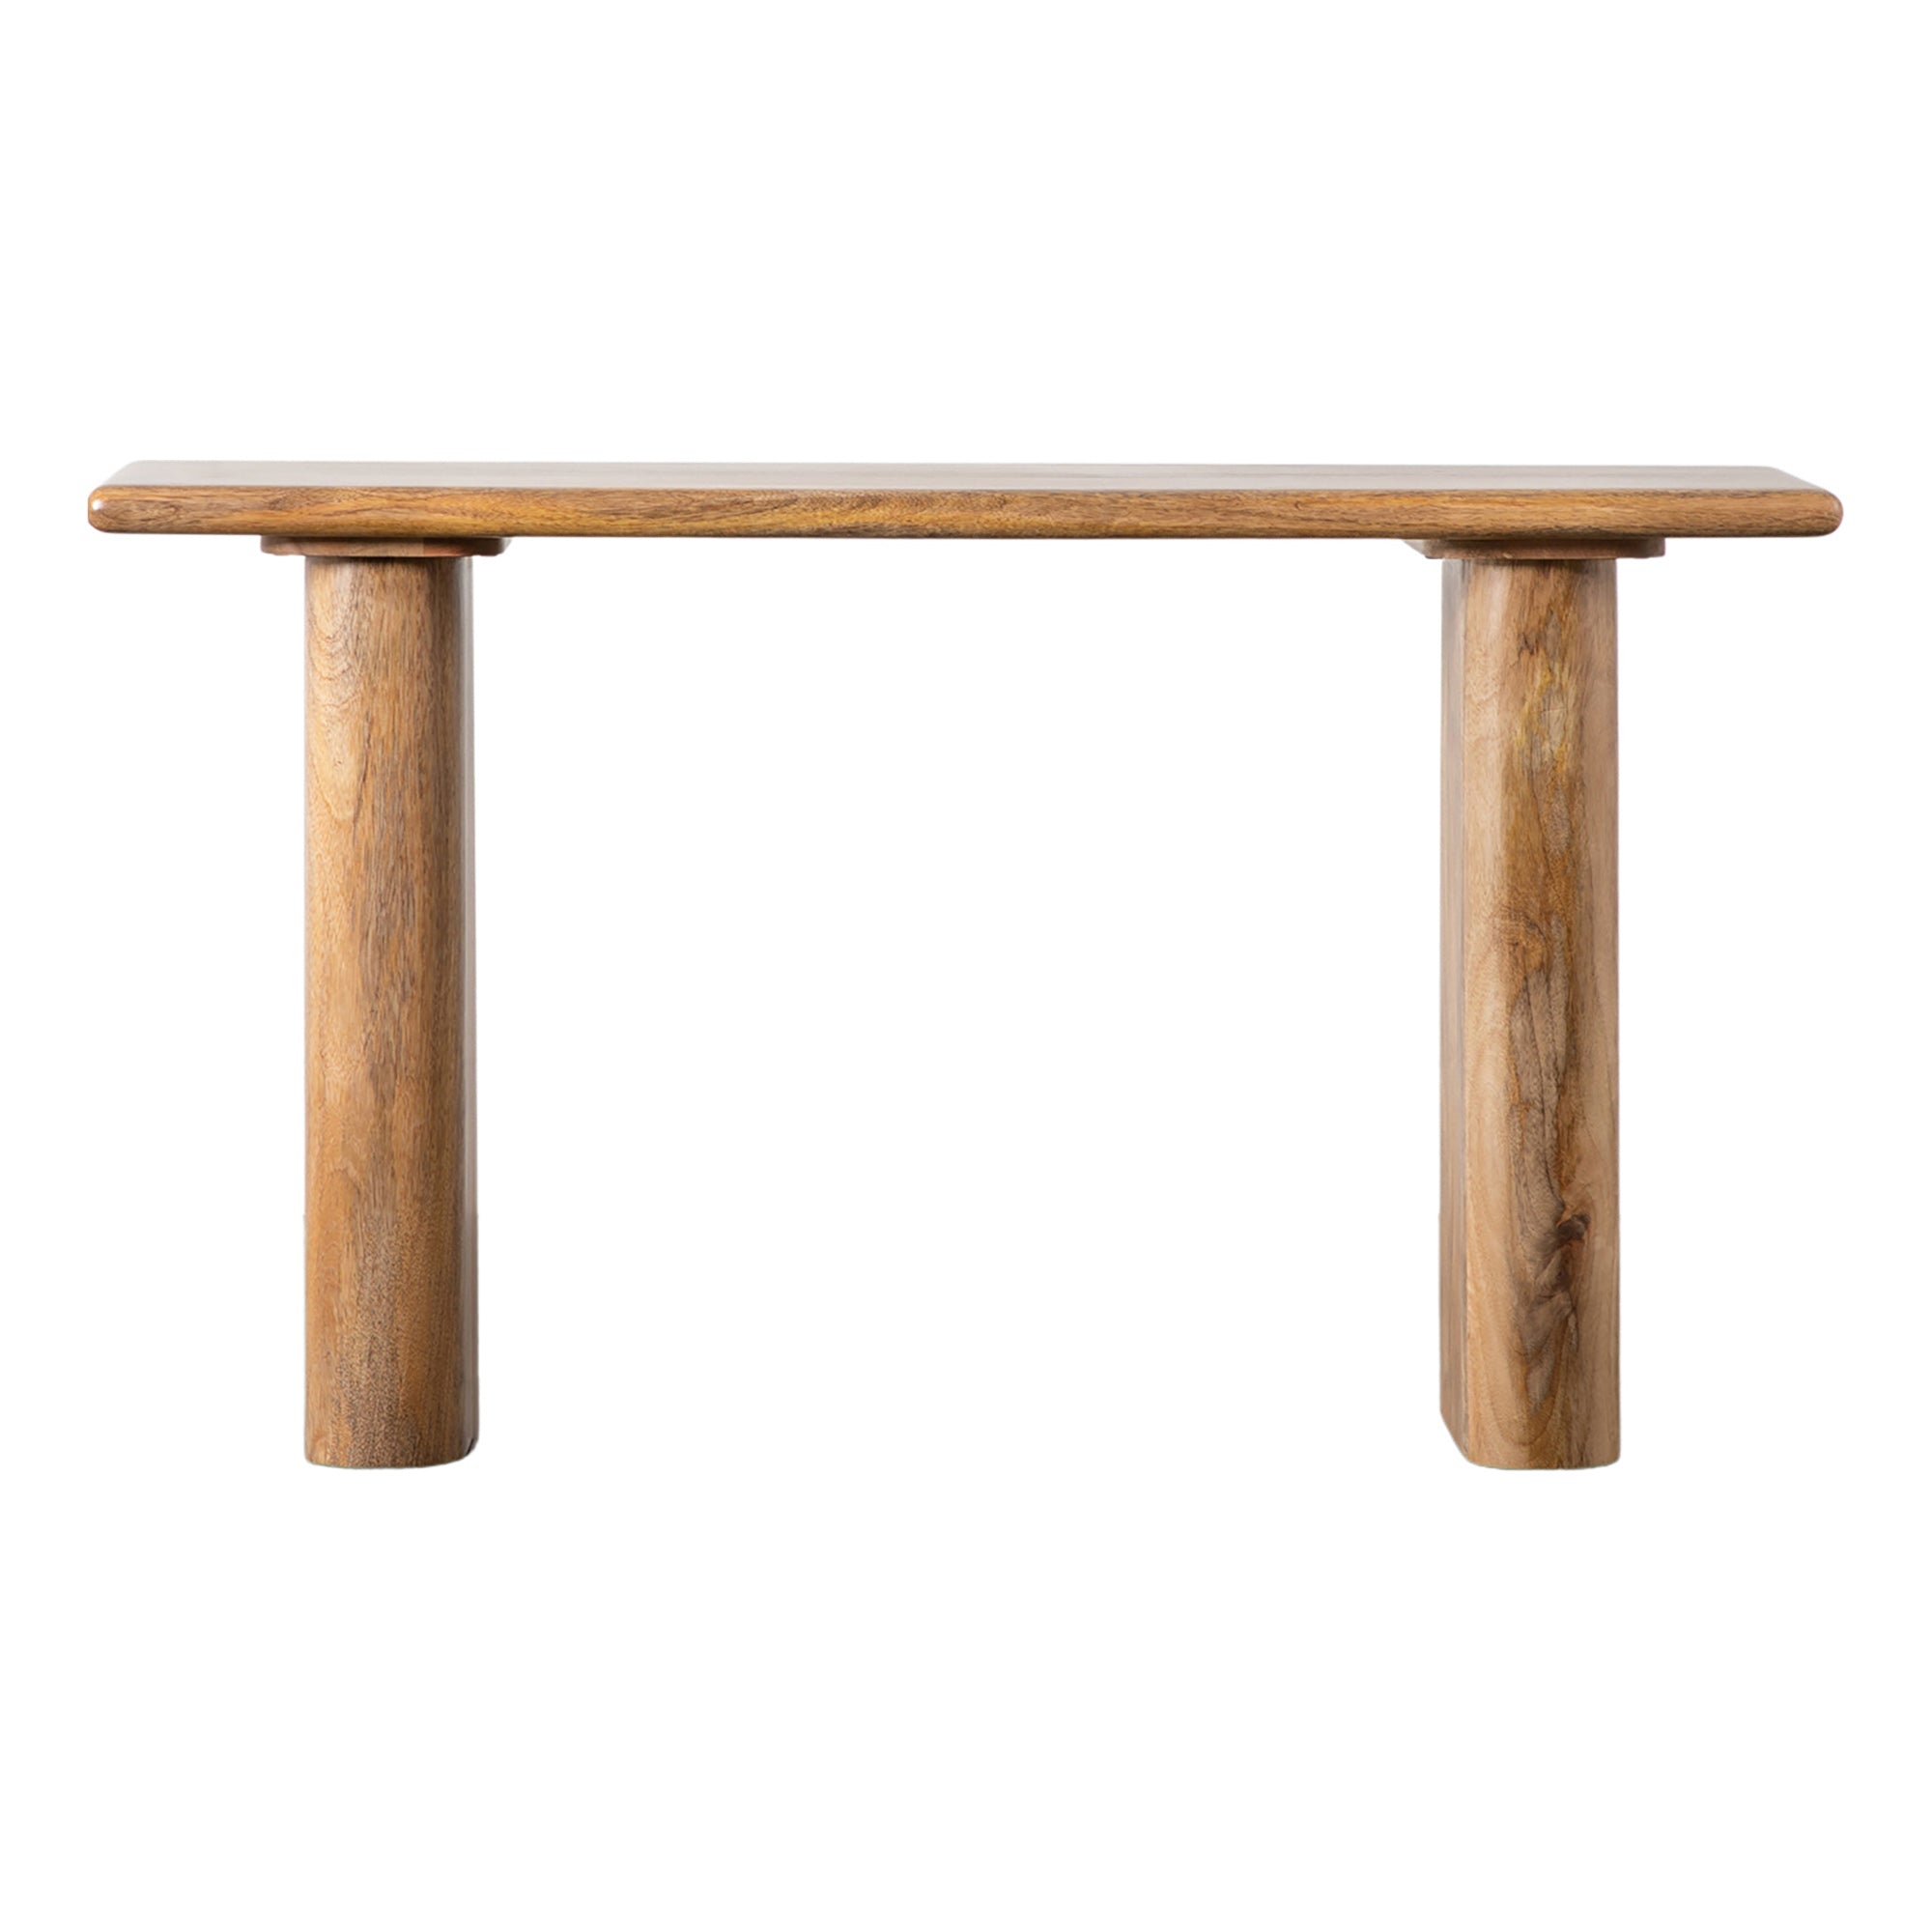 The Curvy Console Table